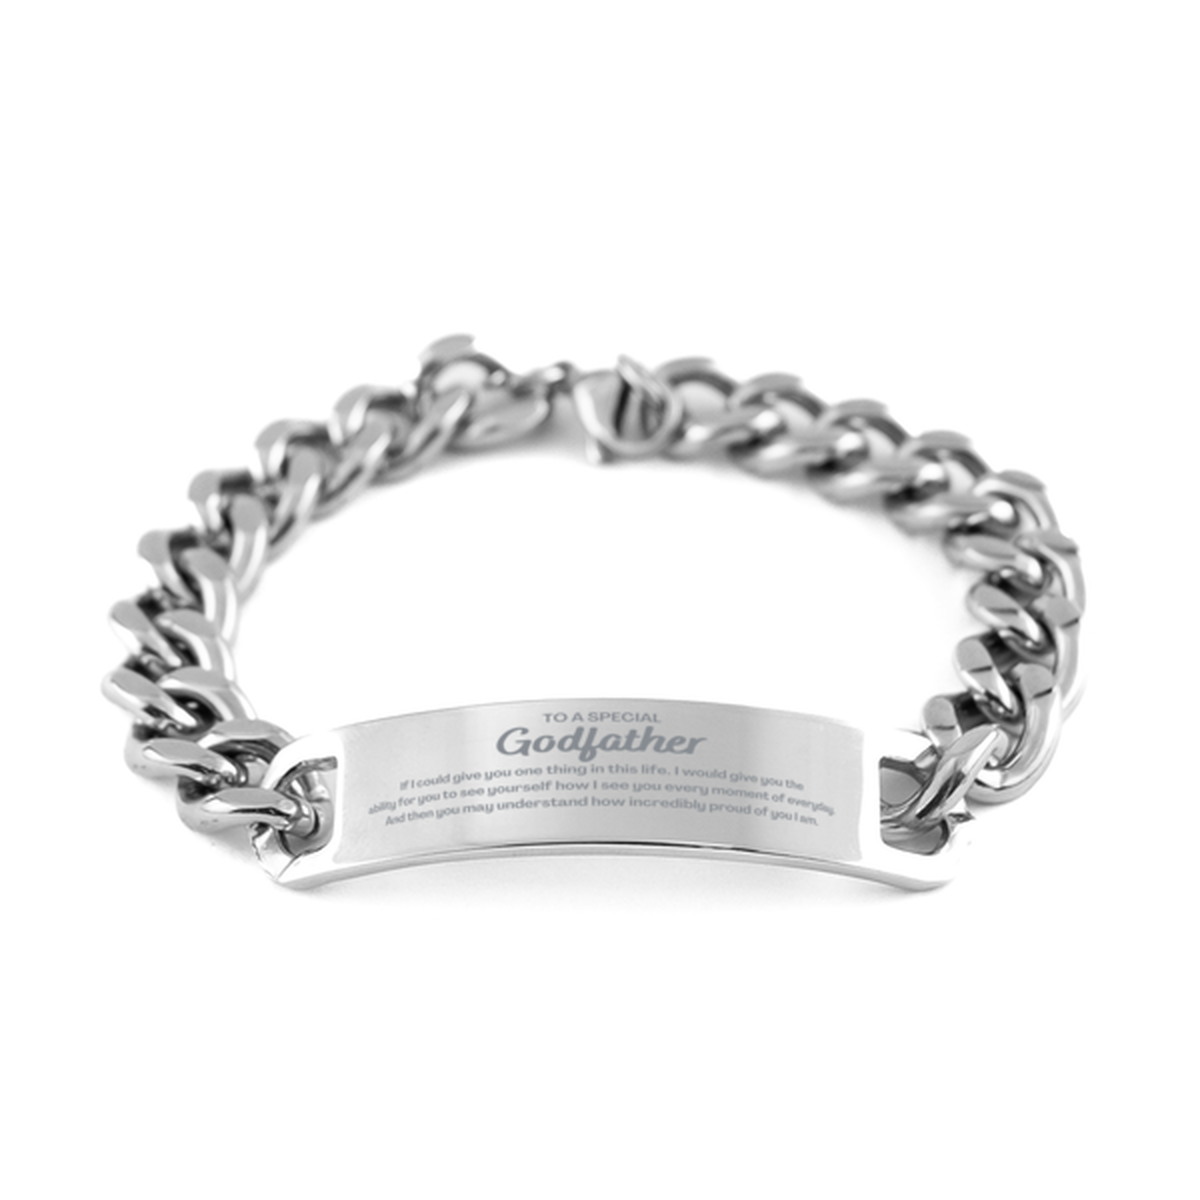 To My Godfather Cuban Chain Stainless Steel Bracelet, Gifts For Godfather Engraved, Inspirational Gifts for Christmas Birthday, Epic Gifts for Godfather To A Special Godfather how incredibly proud of you I am